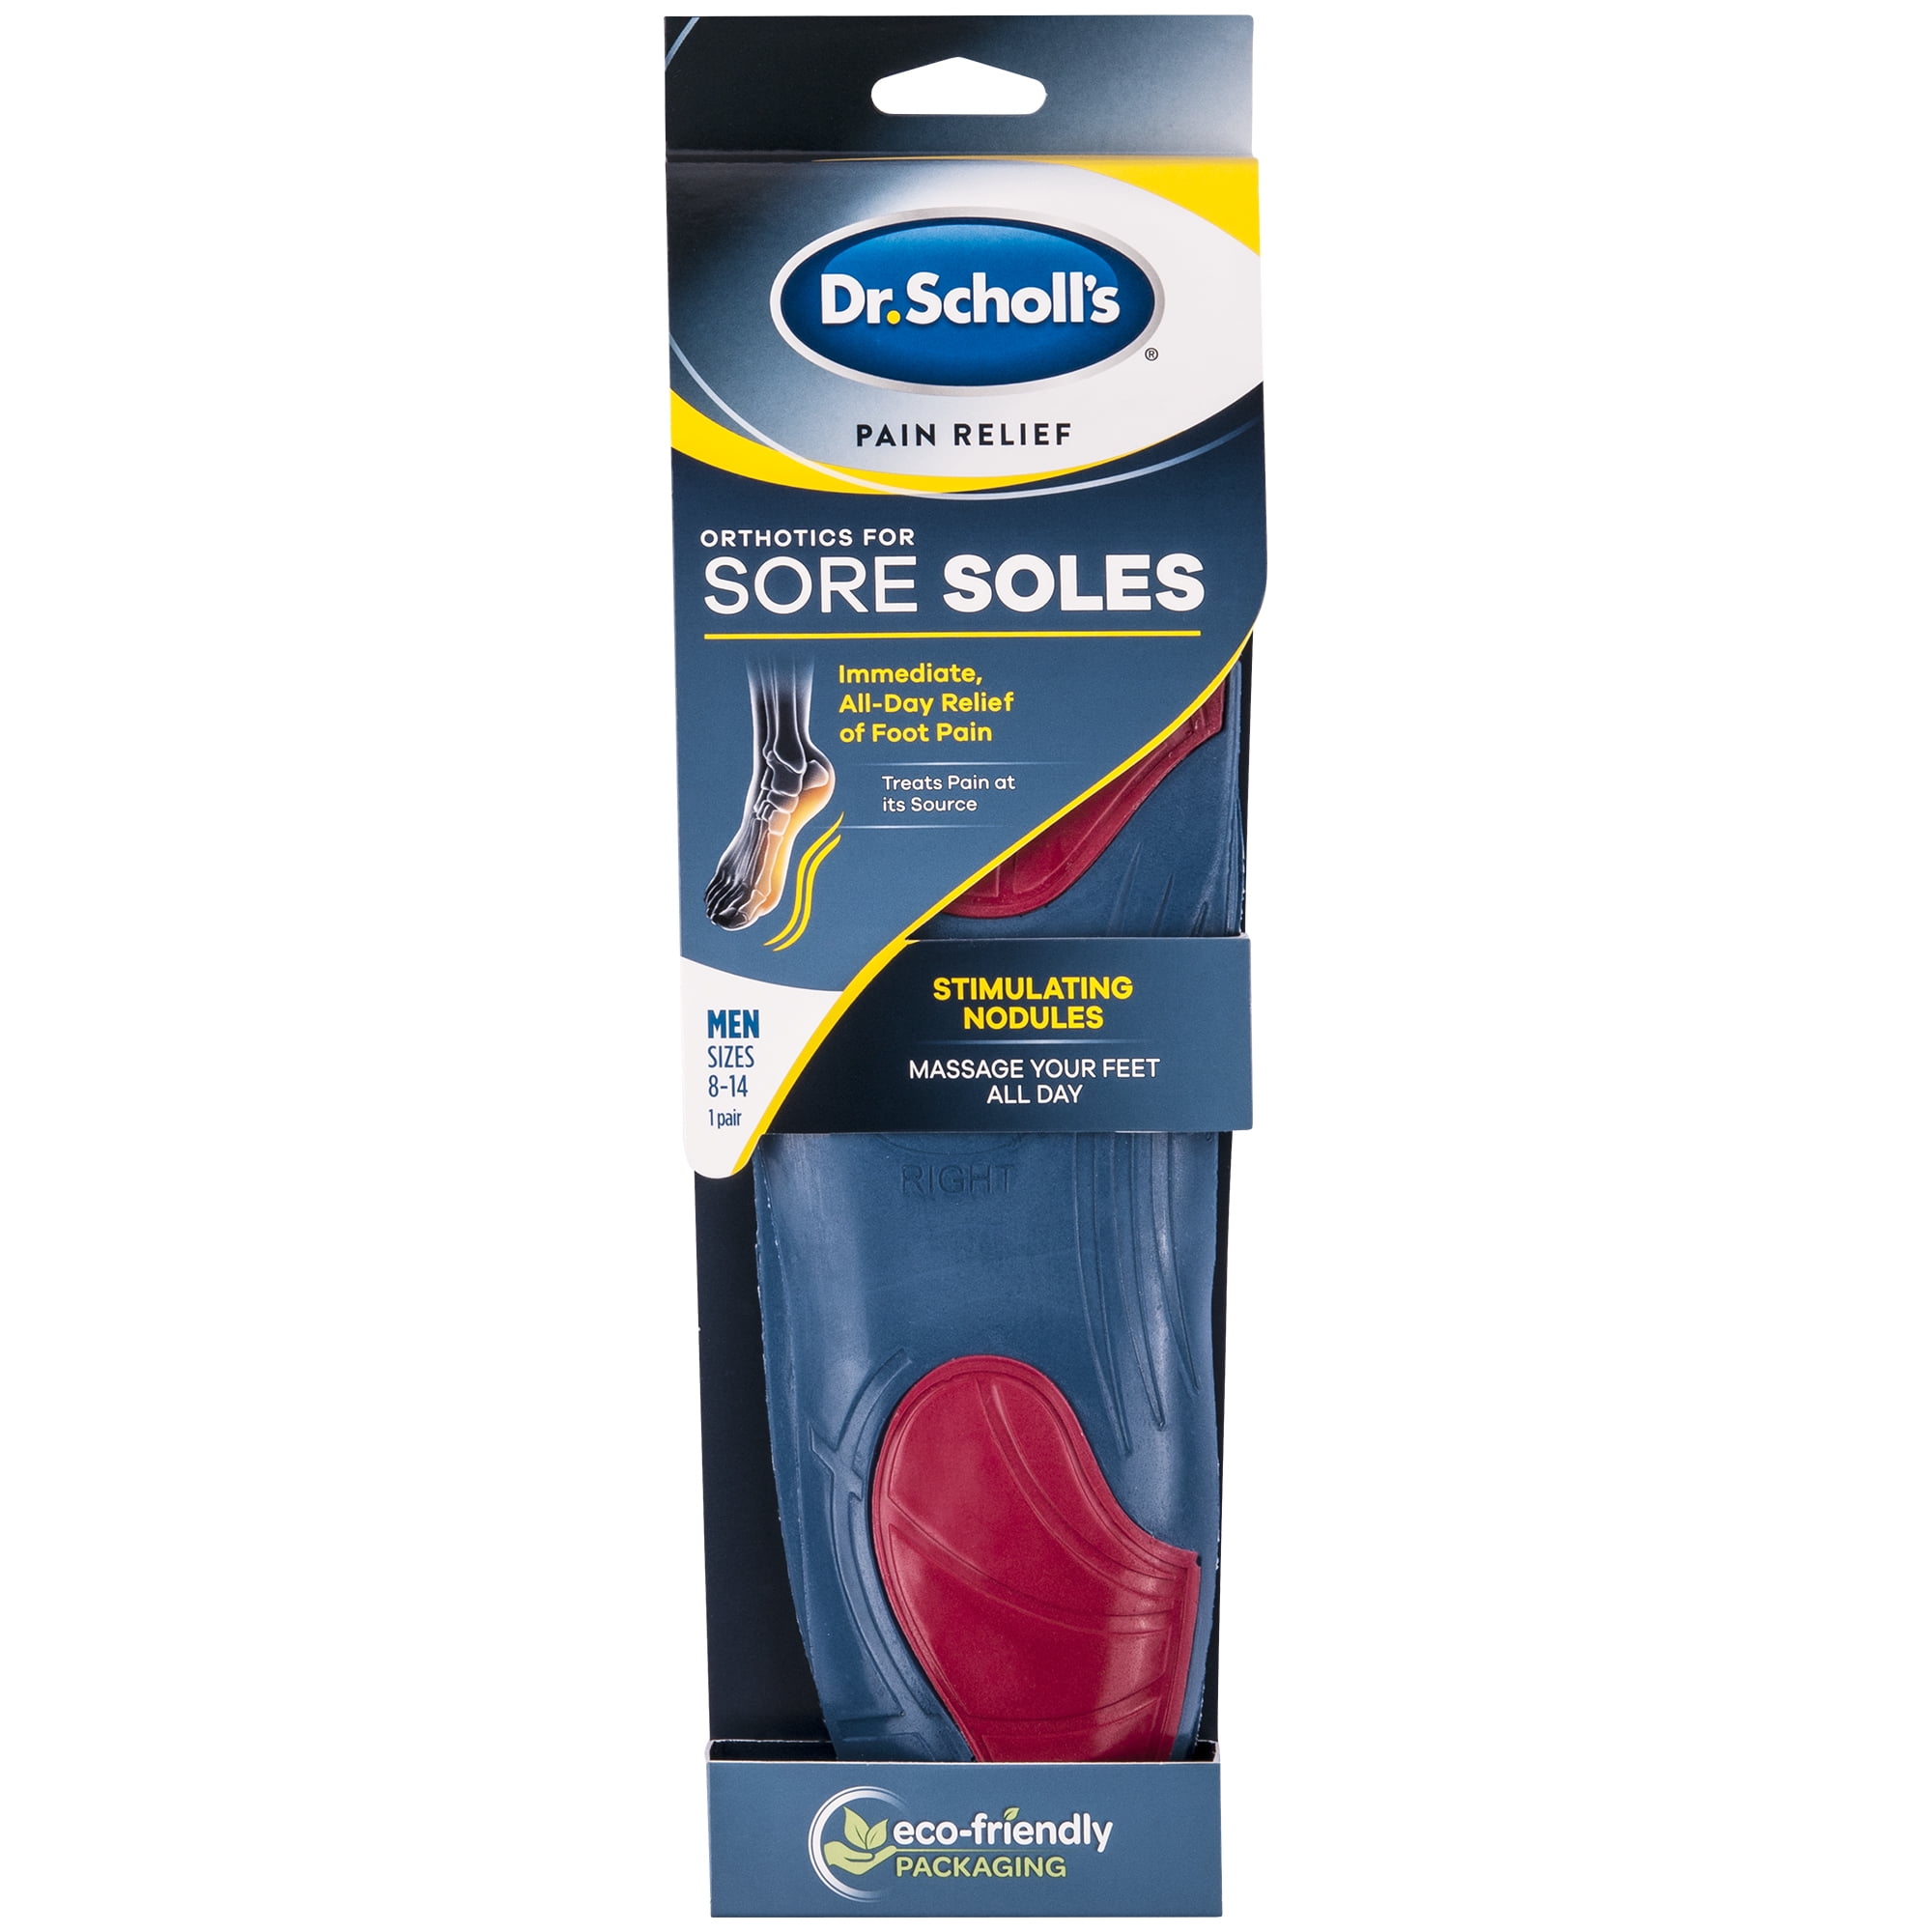 Dr. Scholl's Pain Relief Orthotics for Sore Soles for Men, 1 Pair, Size ...